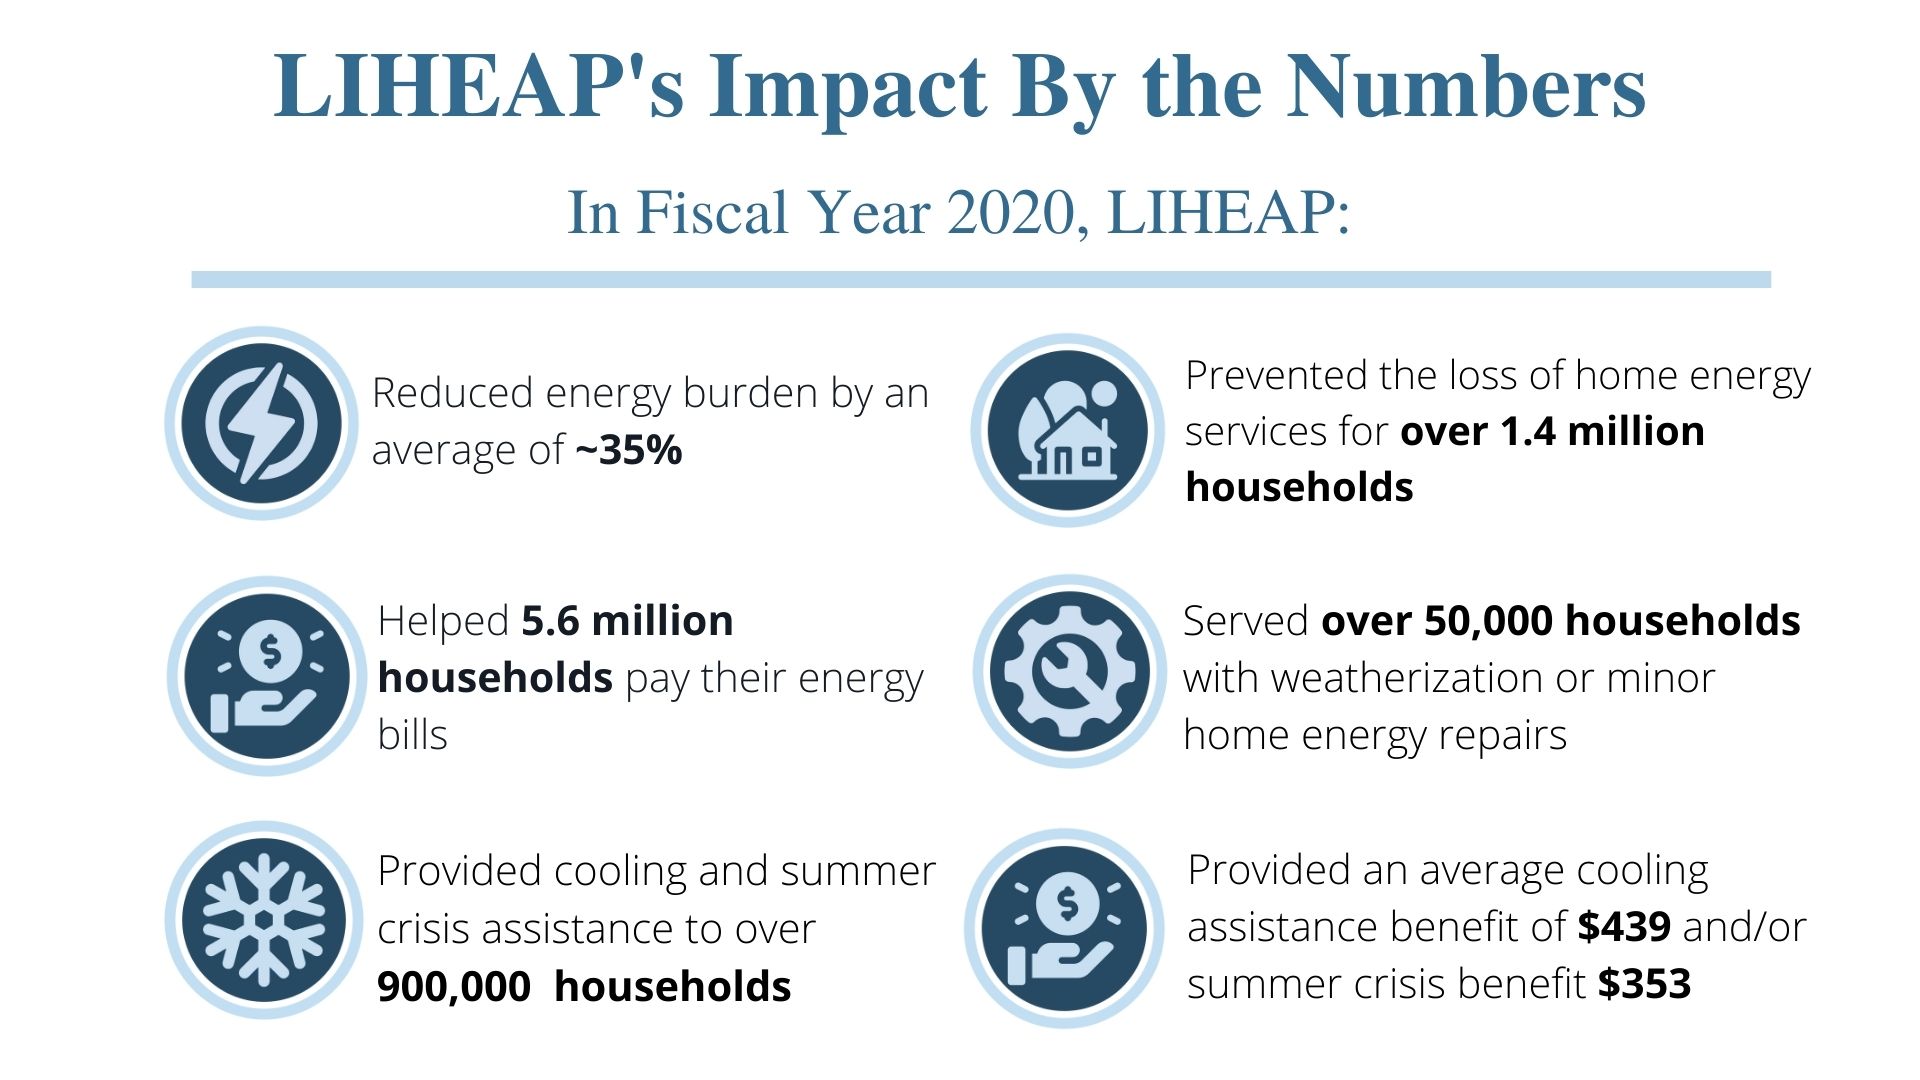 This figure provides national statistics that help demonstrate the impact of the HHS Low Income Home Energy Assistance Program (LIHEAP) in alleviating the economic burden of energy costs for low-income families.